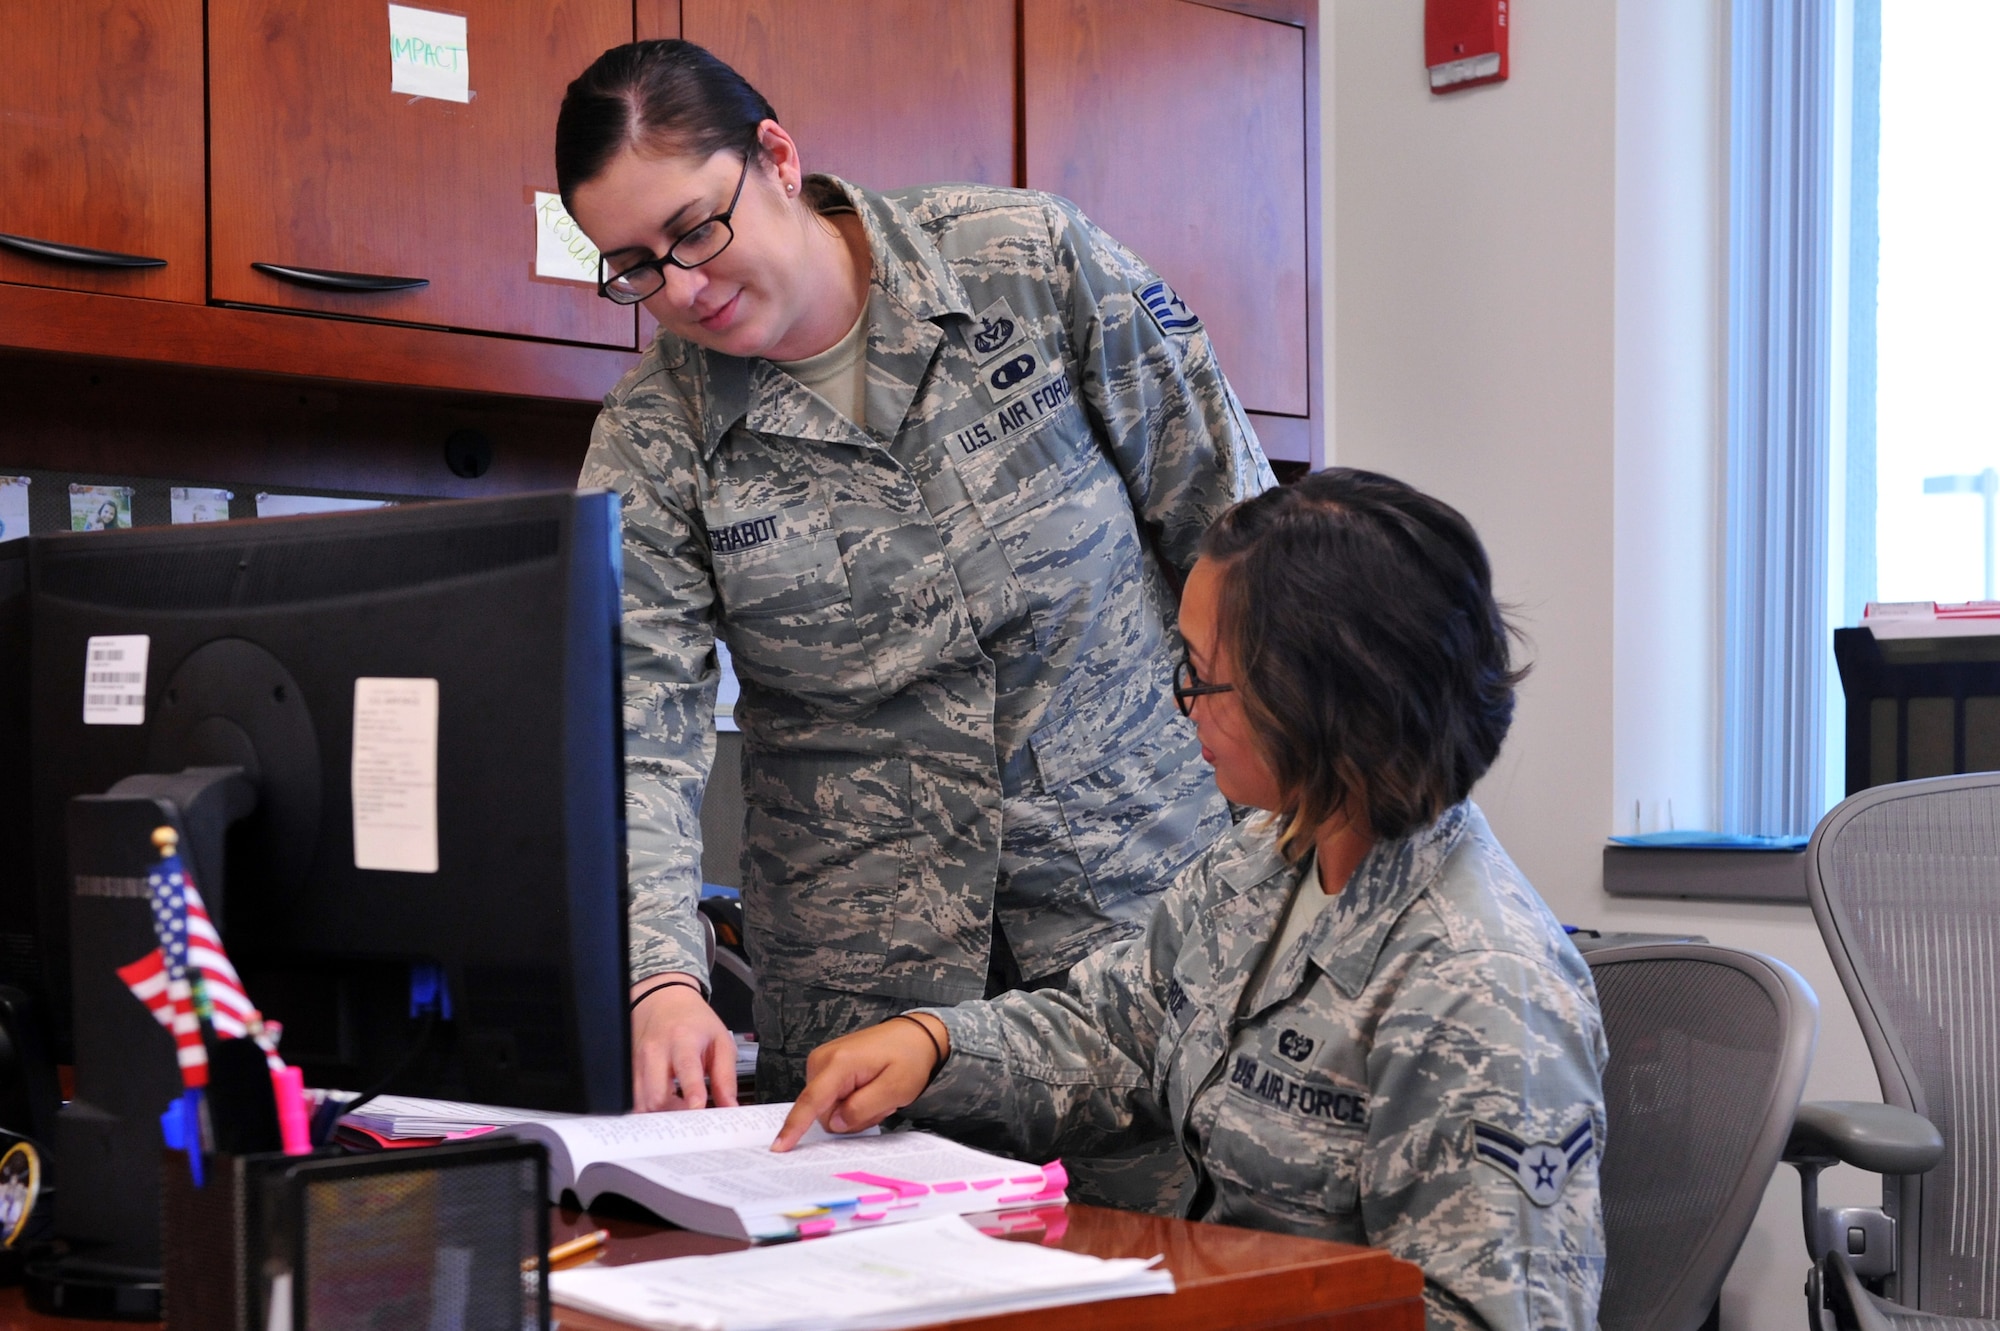 Airman 1st Class Amanda L. Belarde, 460th Space Wing Legal Office military justice paralegal, right, and Staff Sgt. Michelle Chabot, 460th Space wing Legal Office NCOIC of military justice, look over reference material July 29, 2014, in the 460th Space Wing Legal Office on Buckley Air Force Base, Colo. Paralegals support virtually every area of the legal office, including military justice, claims, civil law, legal assistance, contracts and environmental law.